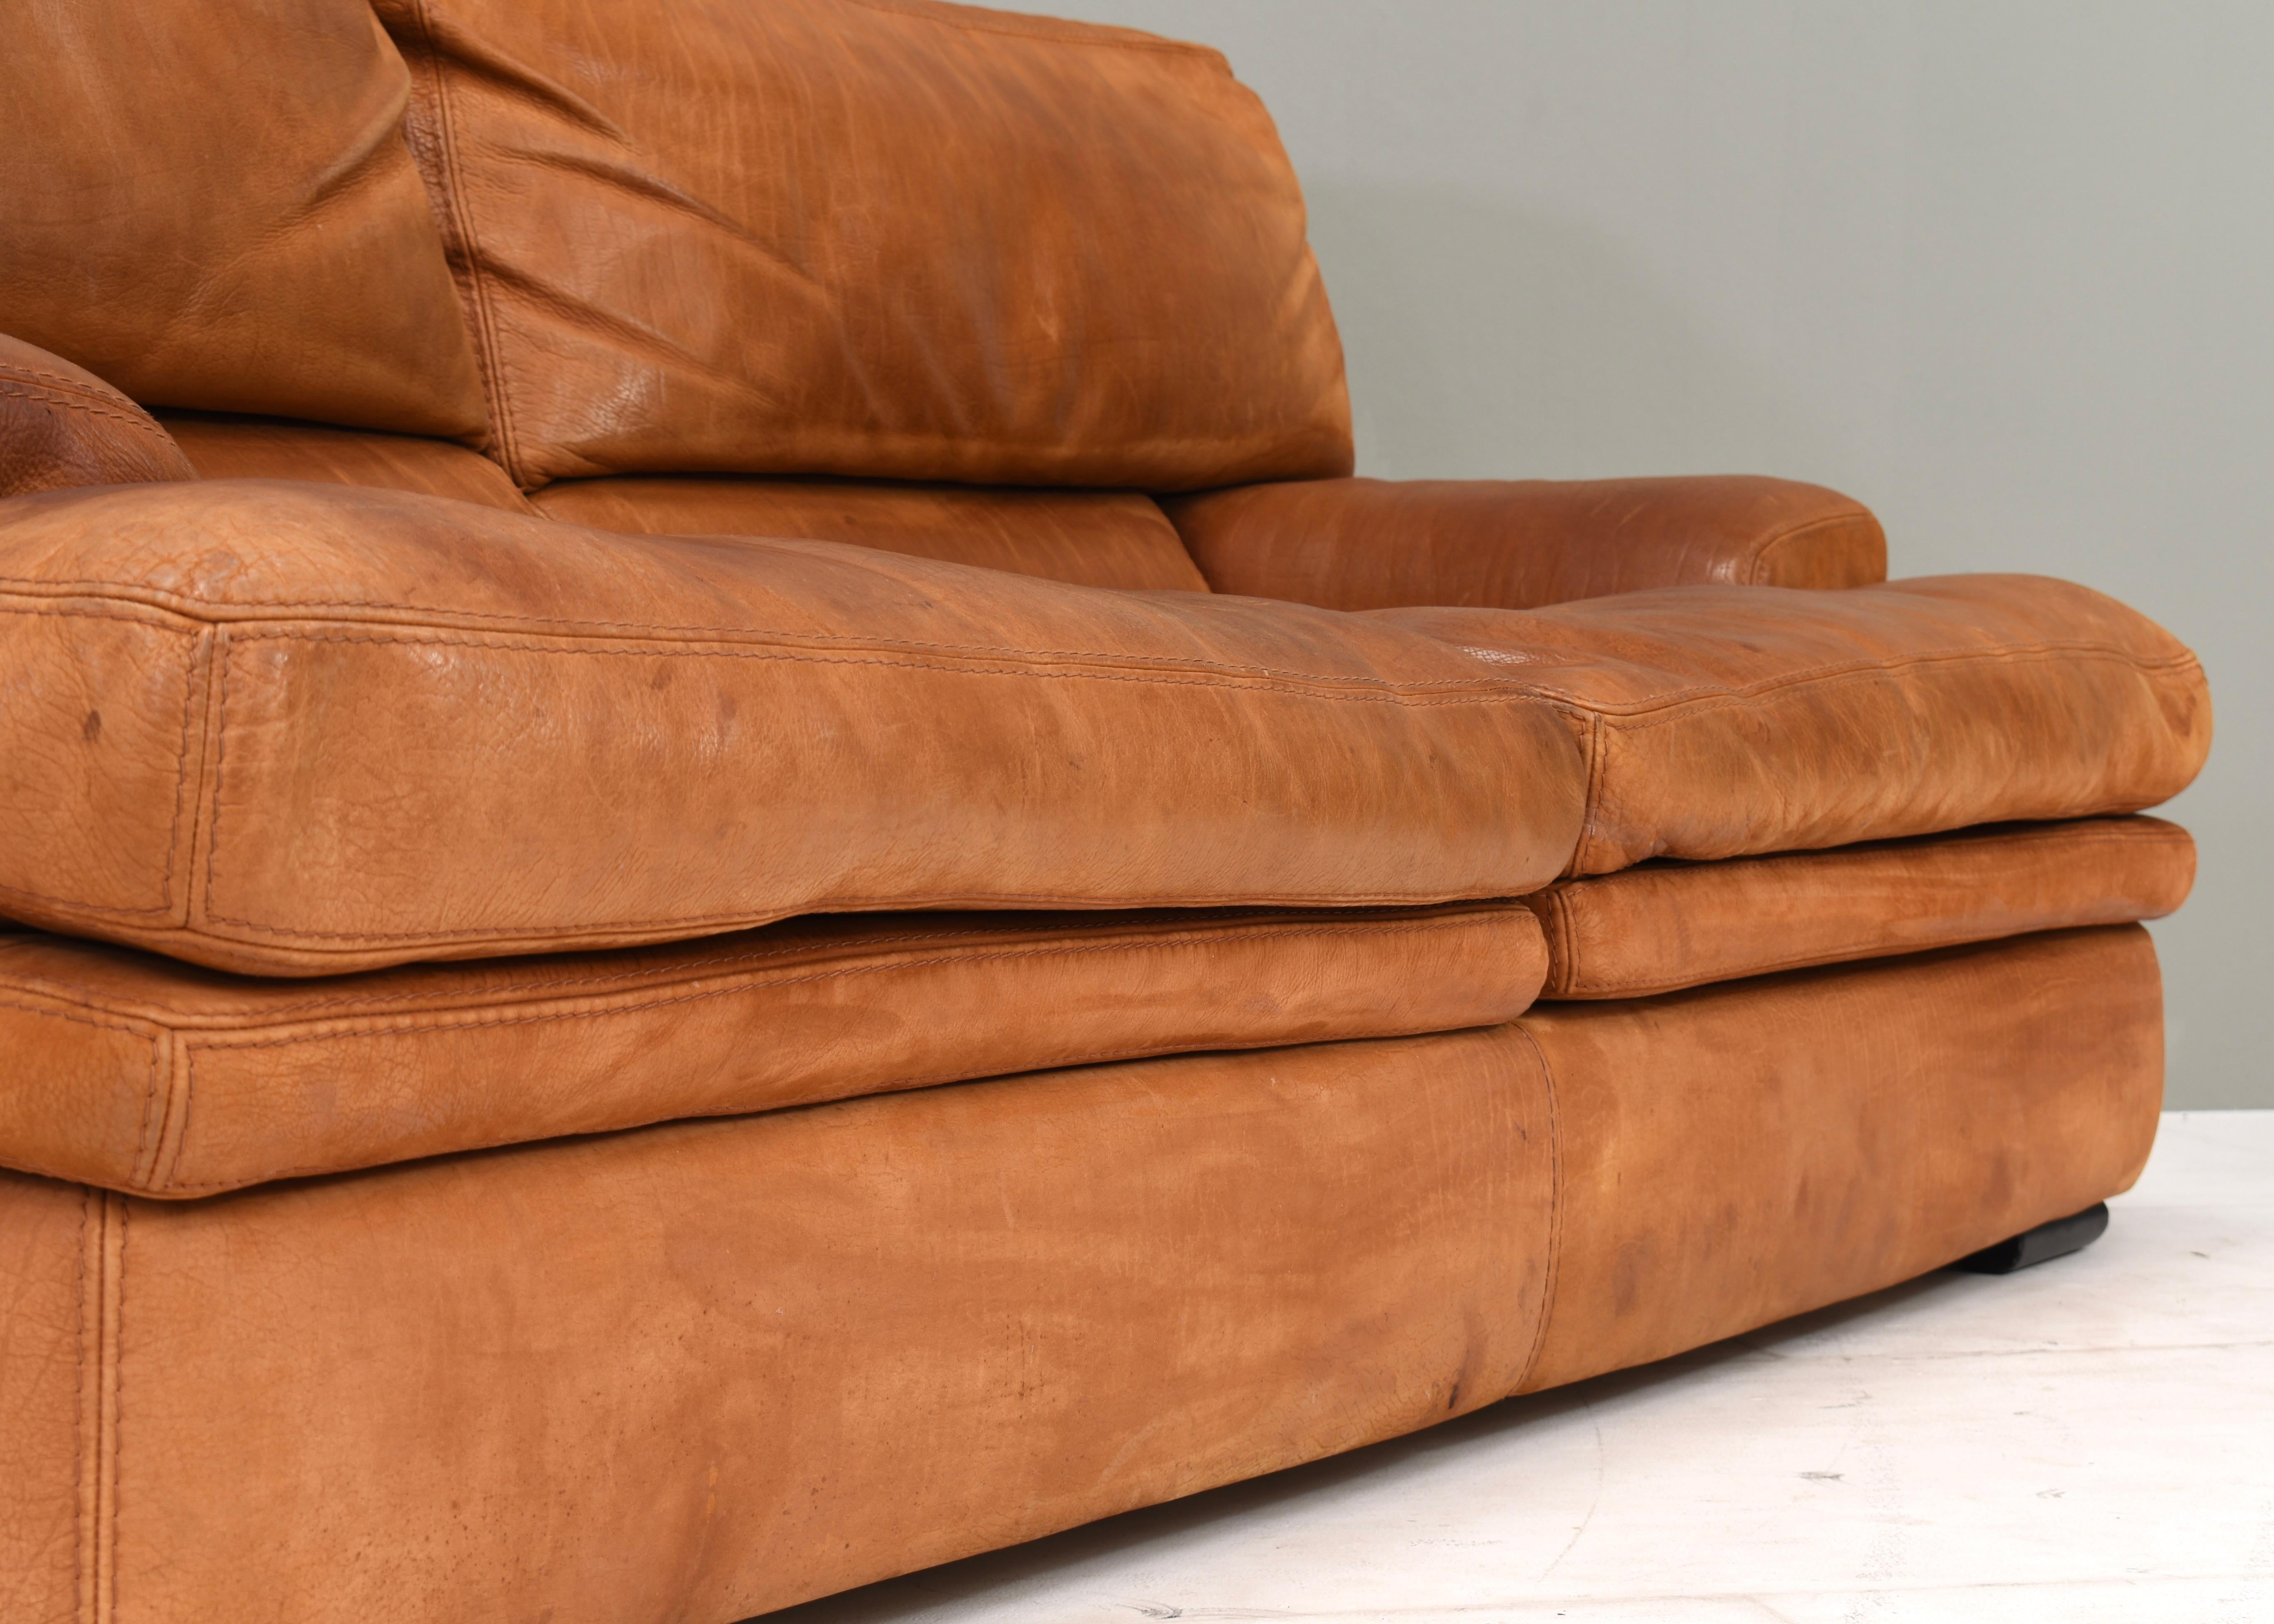 Roche Bobois sofa in patinated Tan / Cognac leather – France, circa 1970/80 For Sale 6